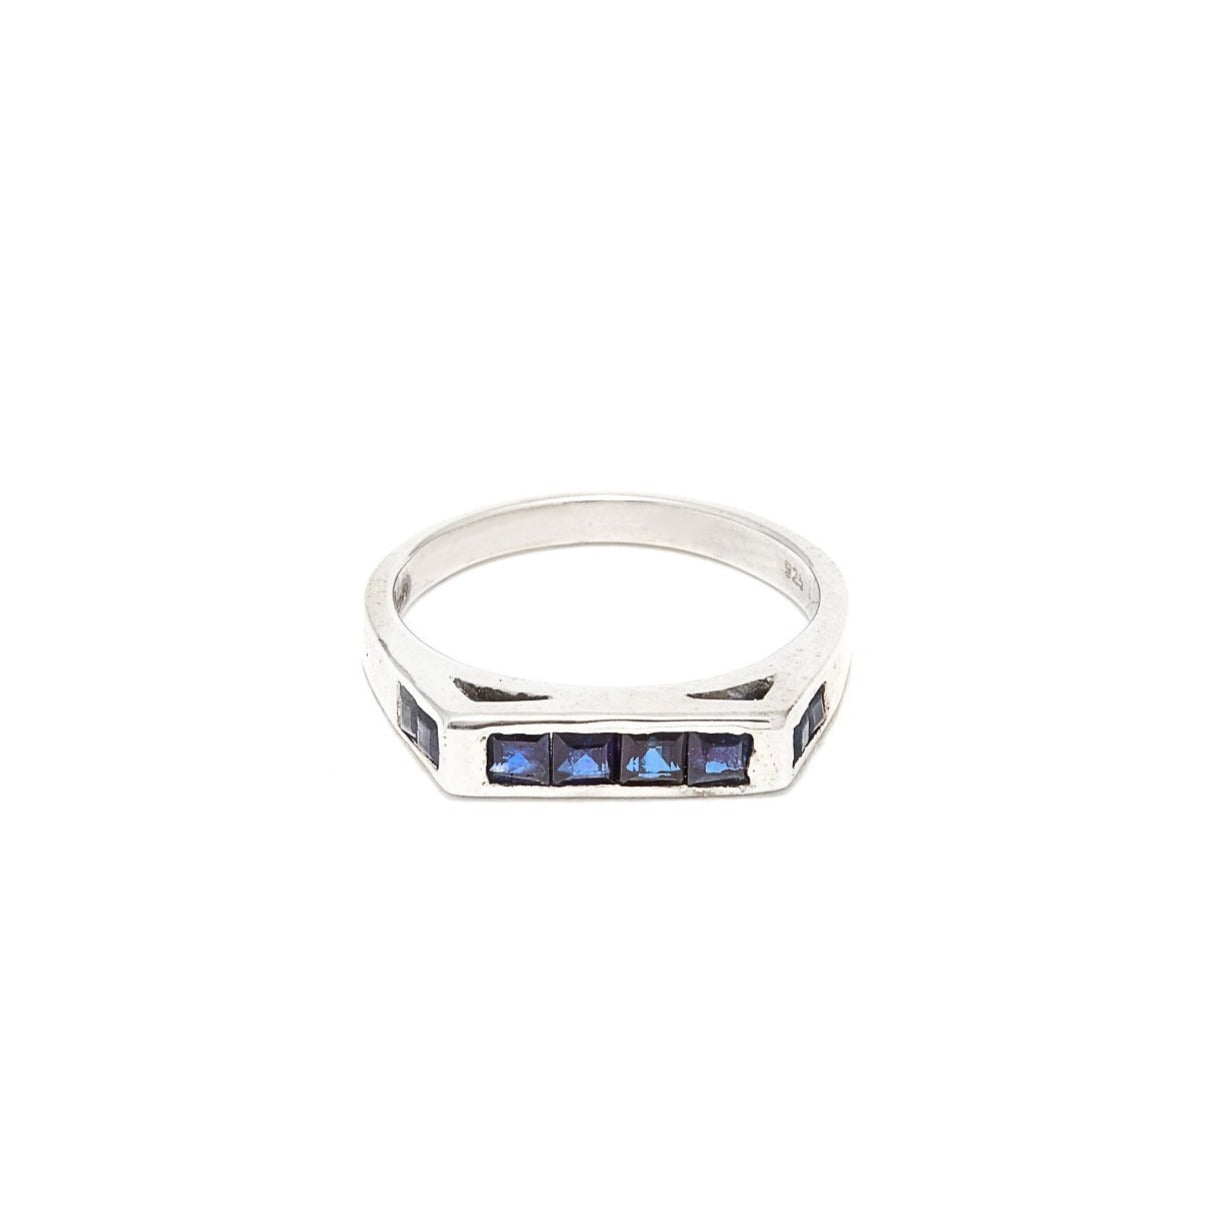 Square Top Sapphire Baguette Ring